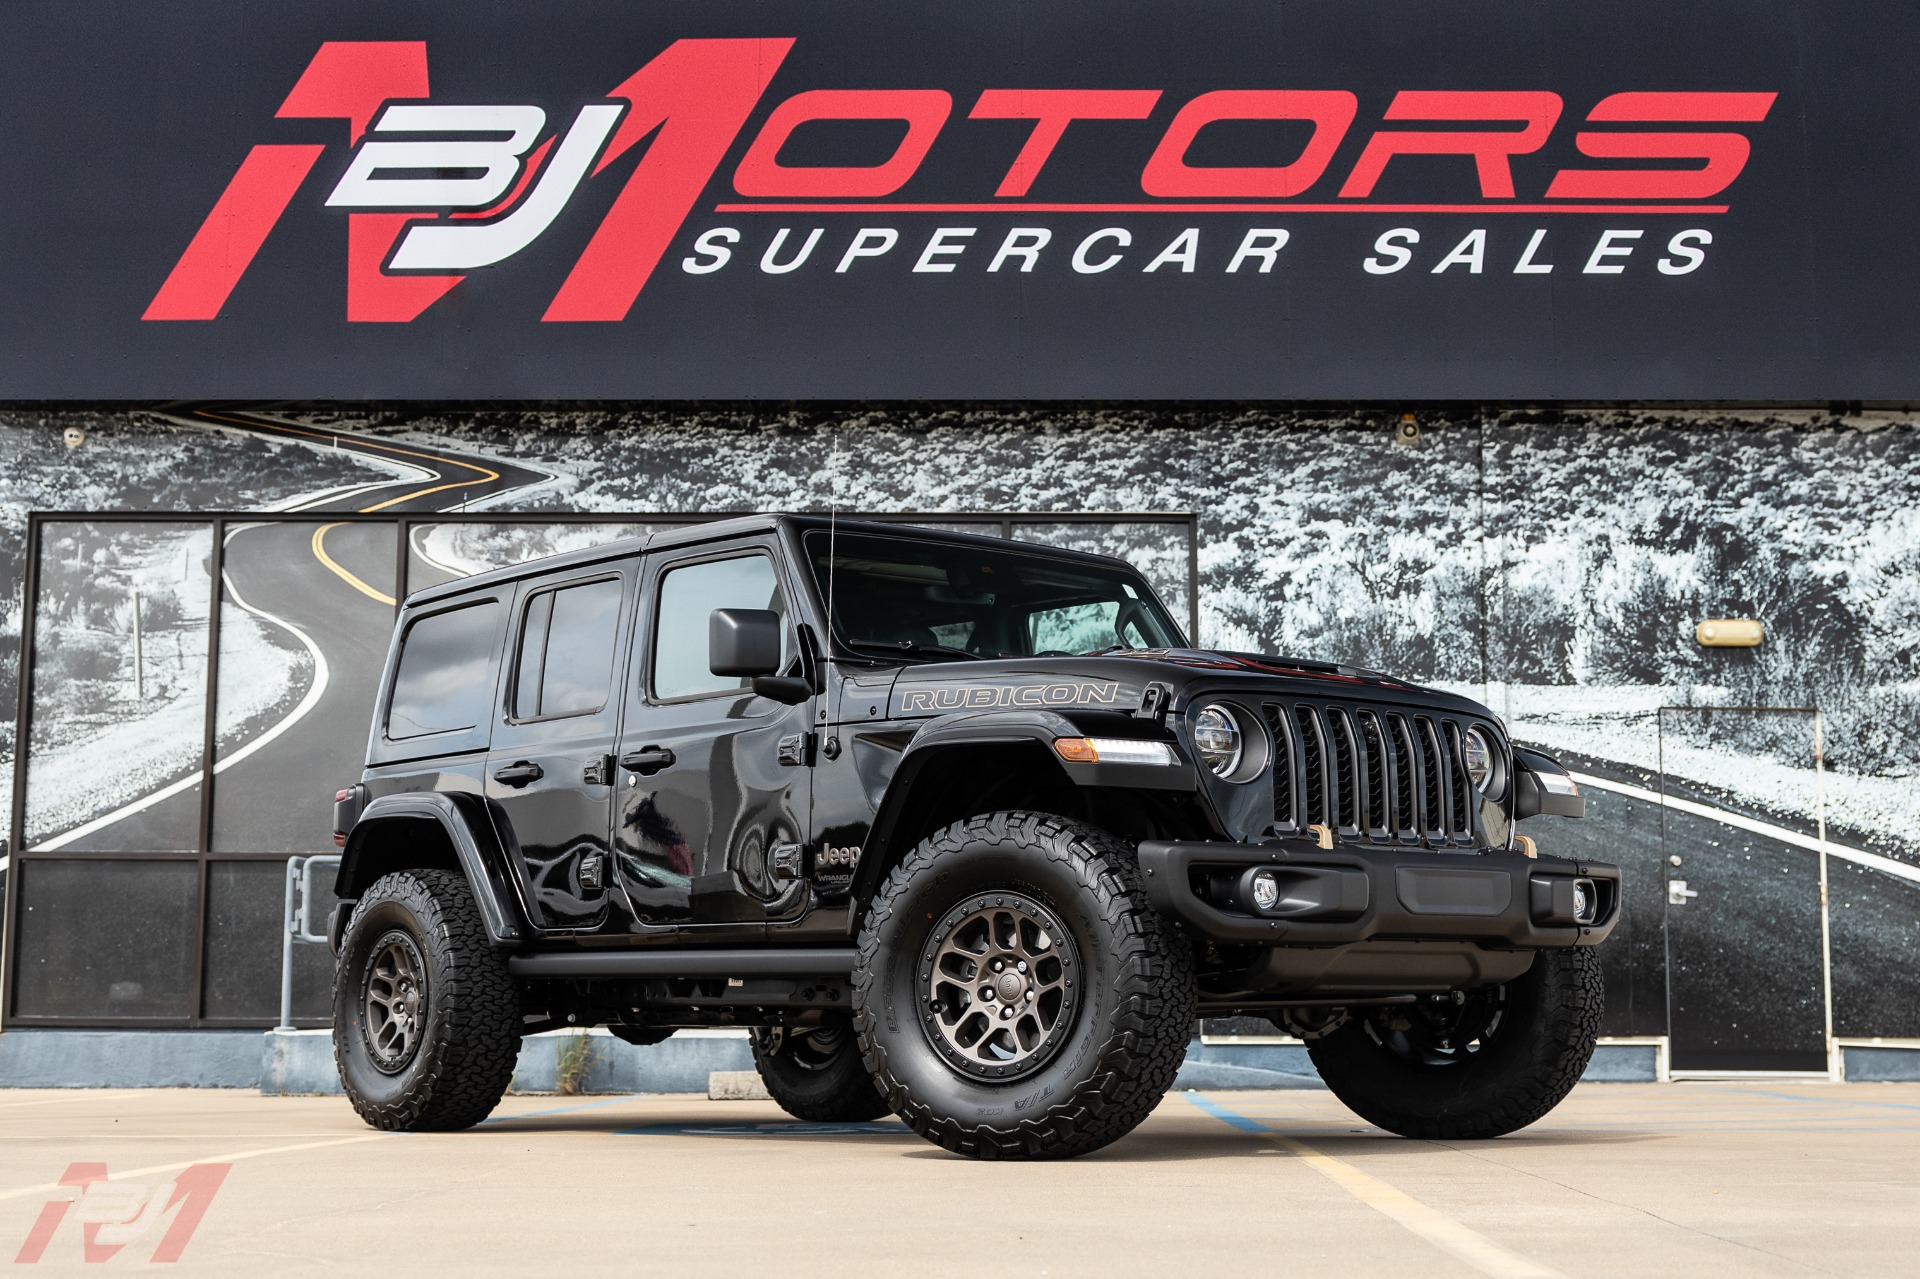 Used 2022 Jeep Wrangler Unlimited Rubicon 392 Xtreme Recon For Sale  (Special Pricing) | BJ Motors Stock #NW108994